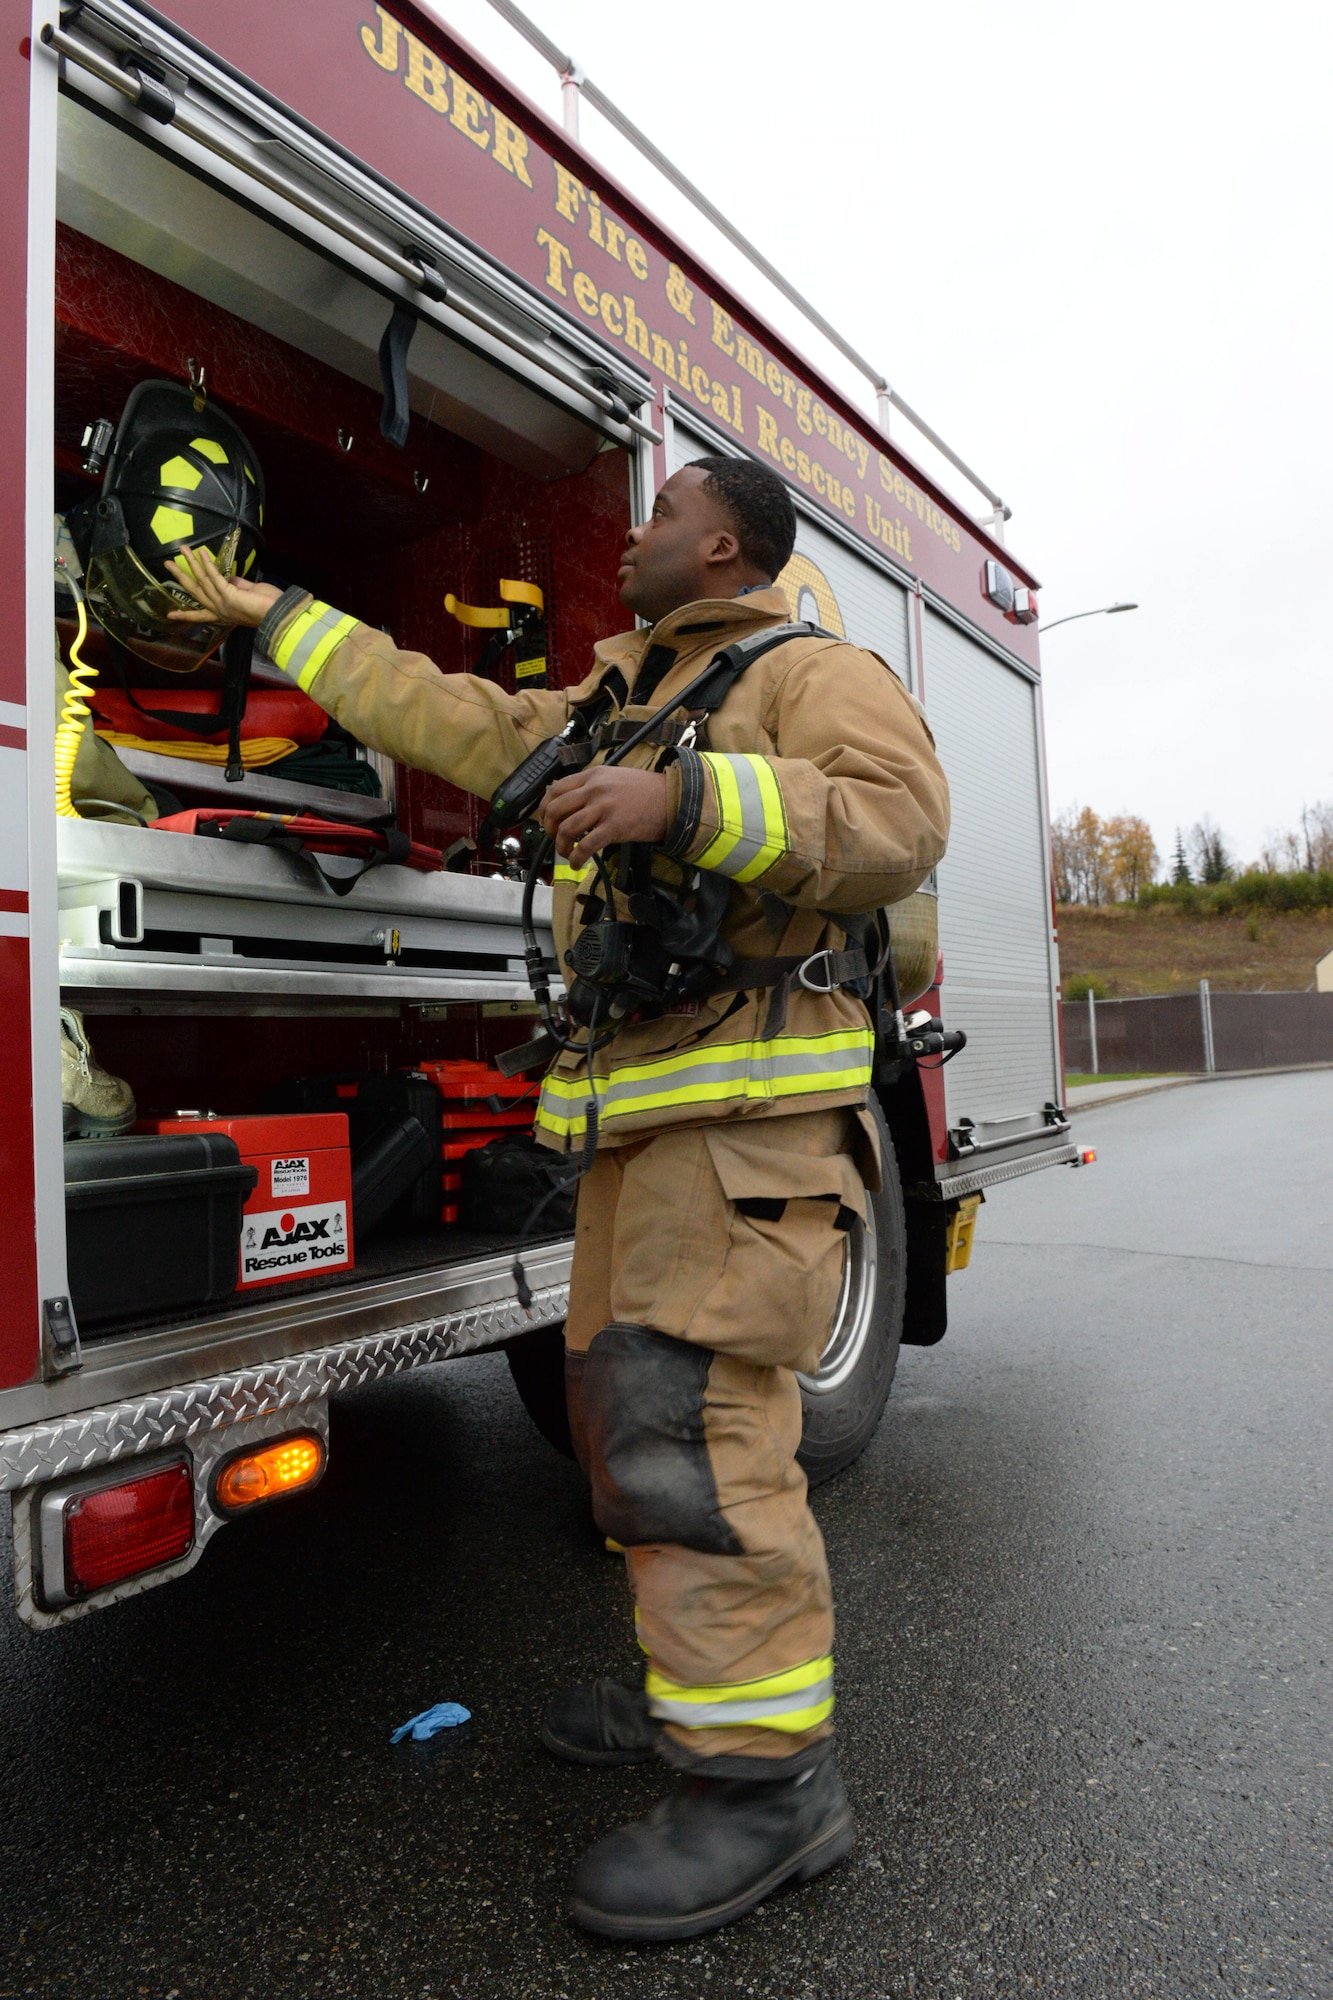 Senior Airman Cameron Nance, fire protection specialist with the 673d Civil Engineer Squadron, picks up gear from the fire truck Oct. 5, 2017, at Joint Base Elmendorf-Richardson, Alaska. Nance participated in a fuel spill exercise simulation, which tested the response actions of base recovery agencies in the event of a mass fuel spill, to ensure installation safety and minimal environmental impact.